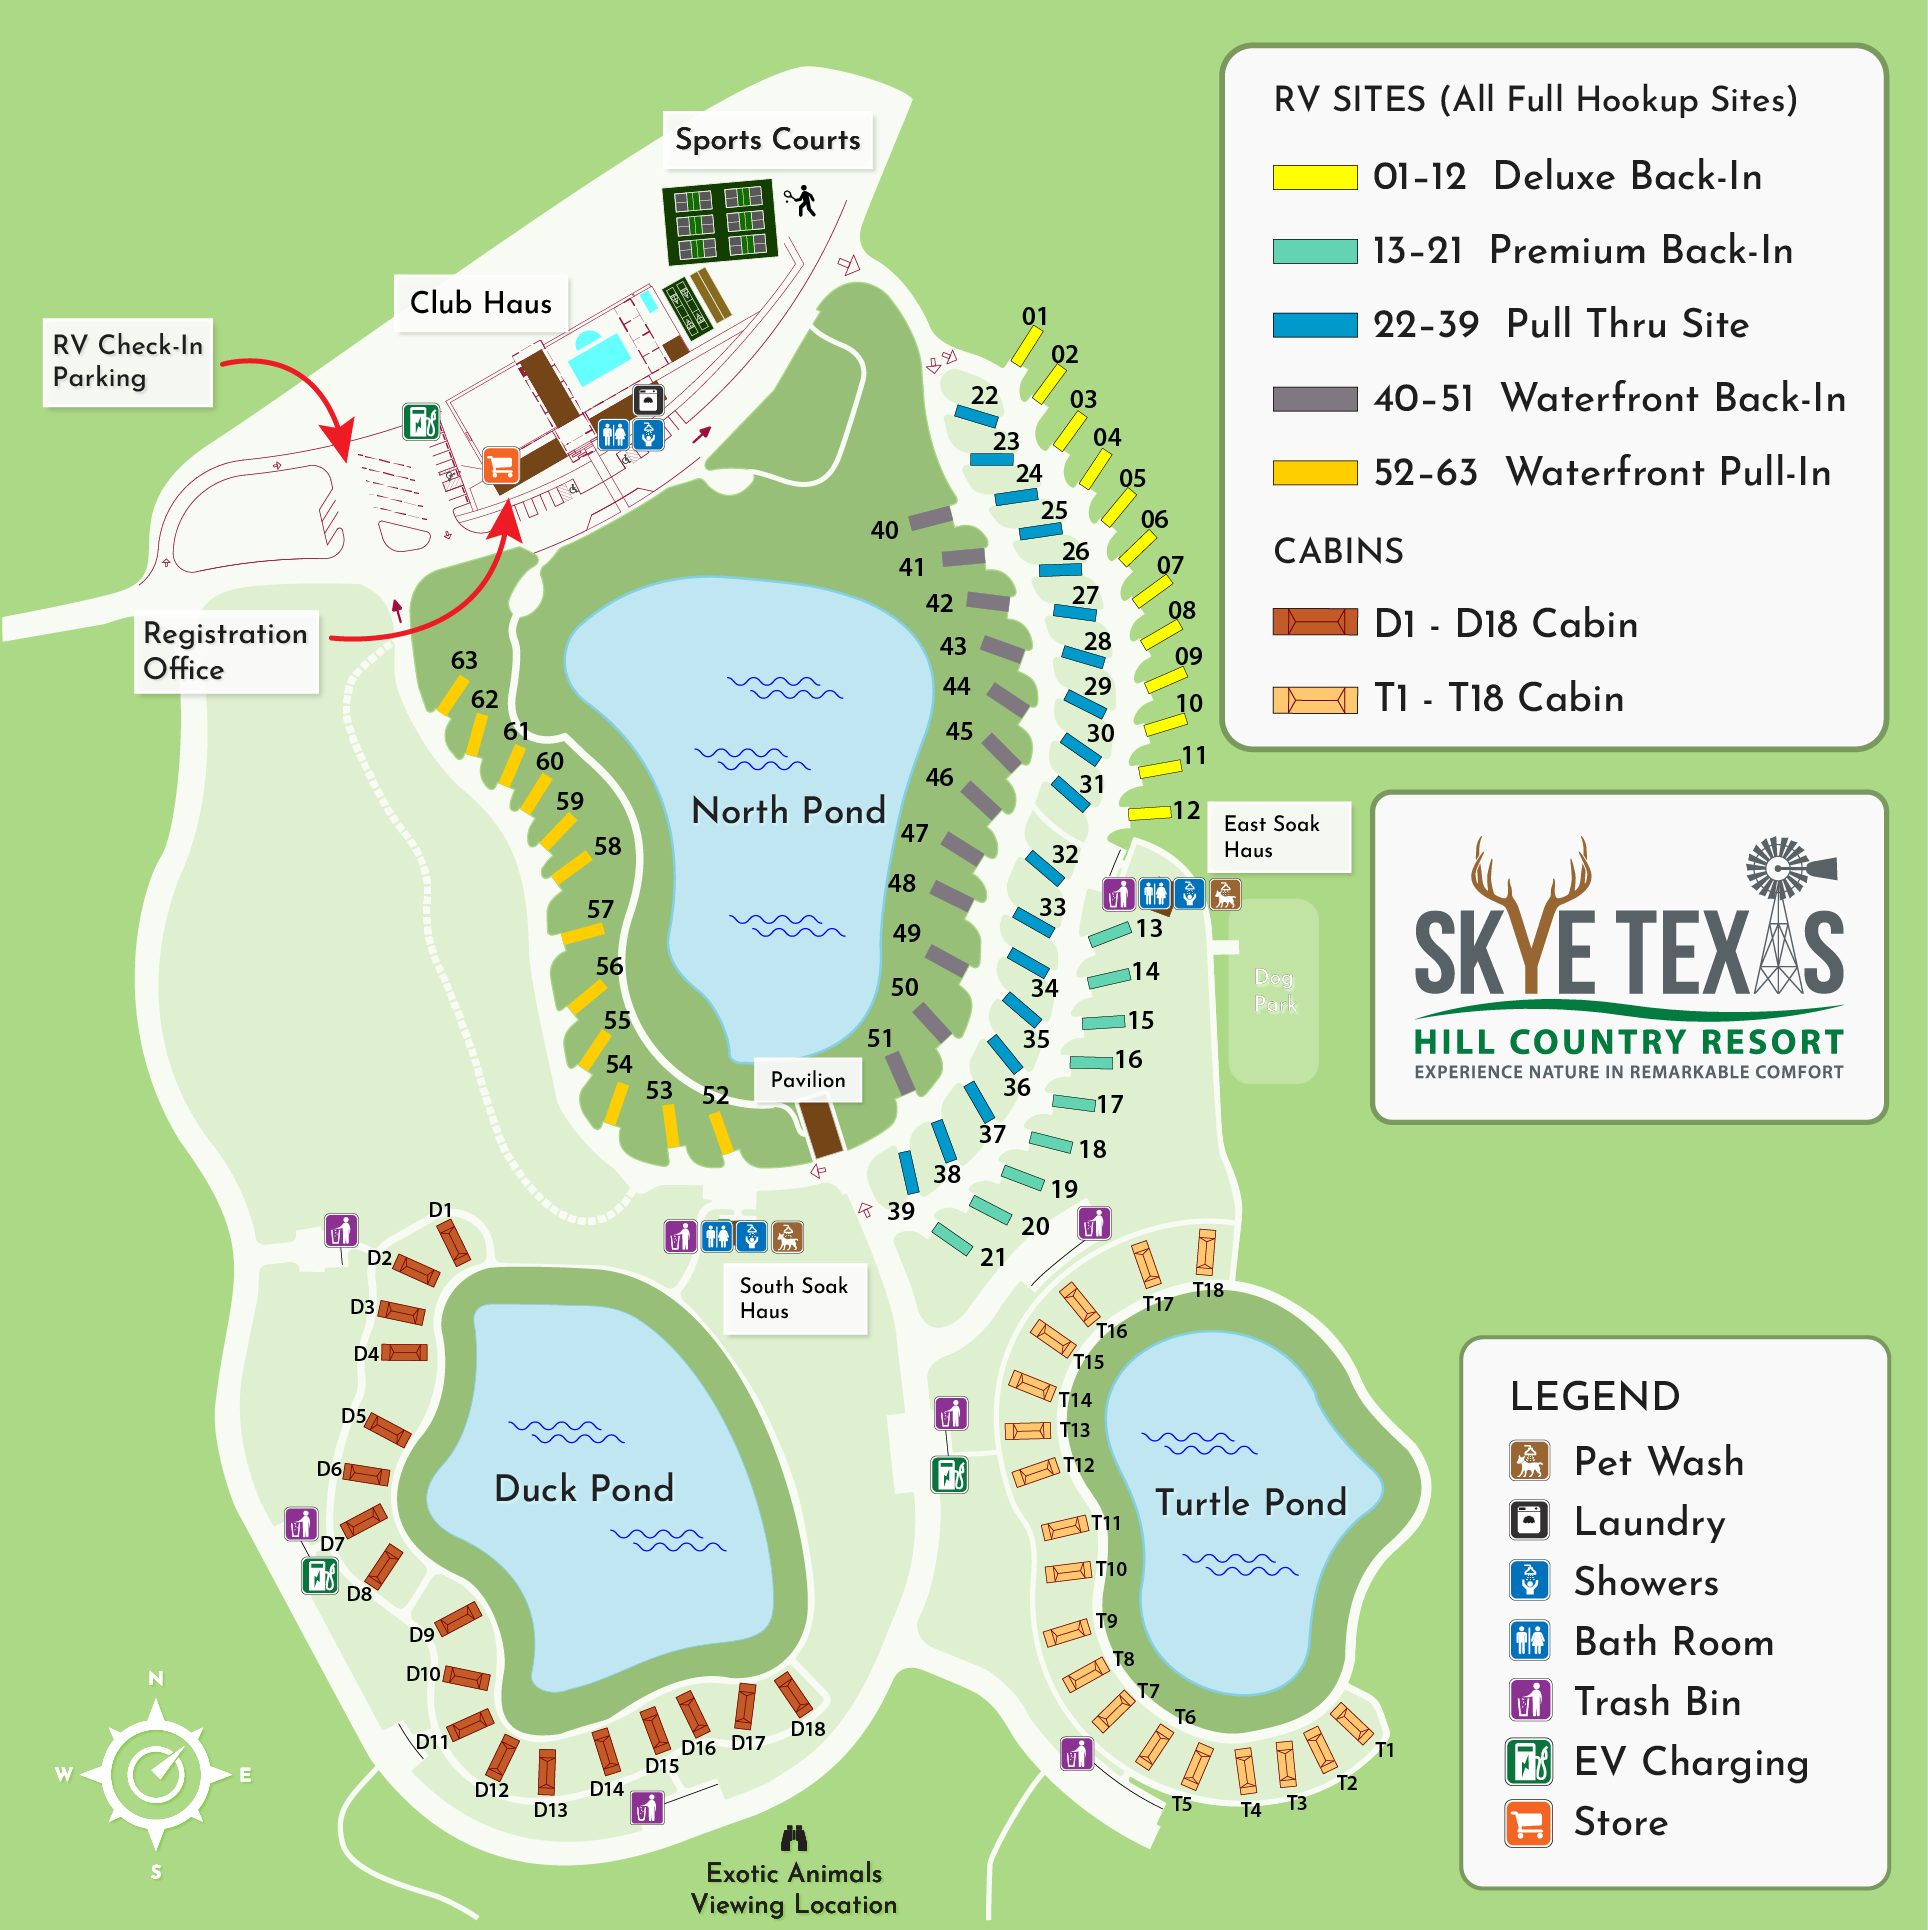 SKYE Texas Hill Country Resort Map